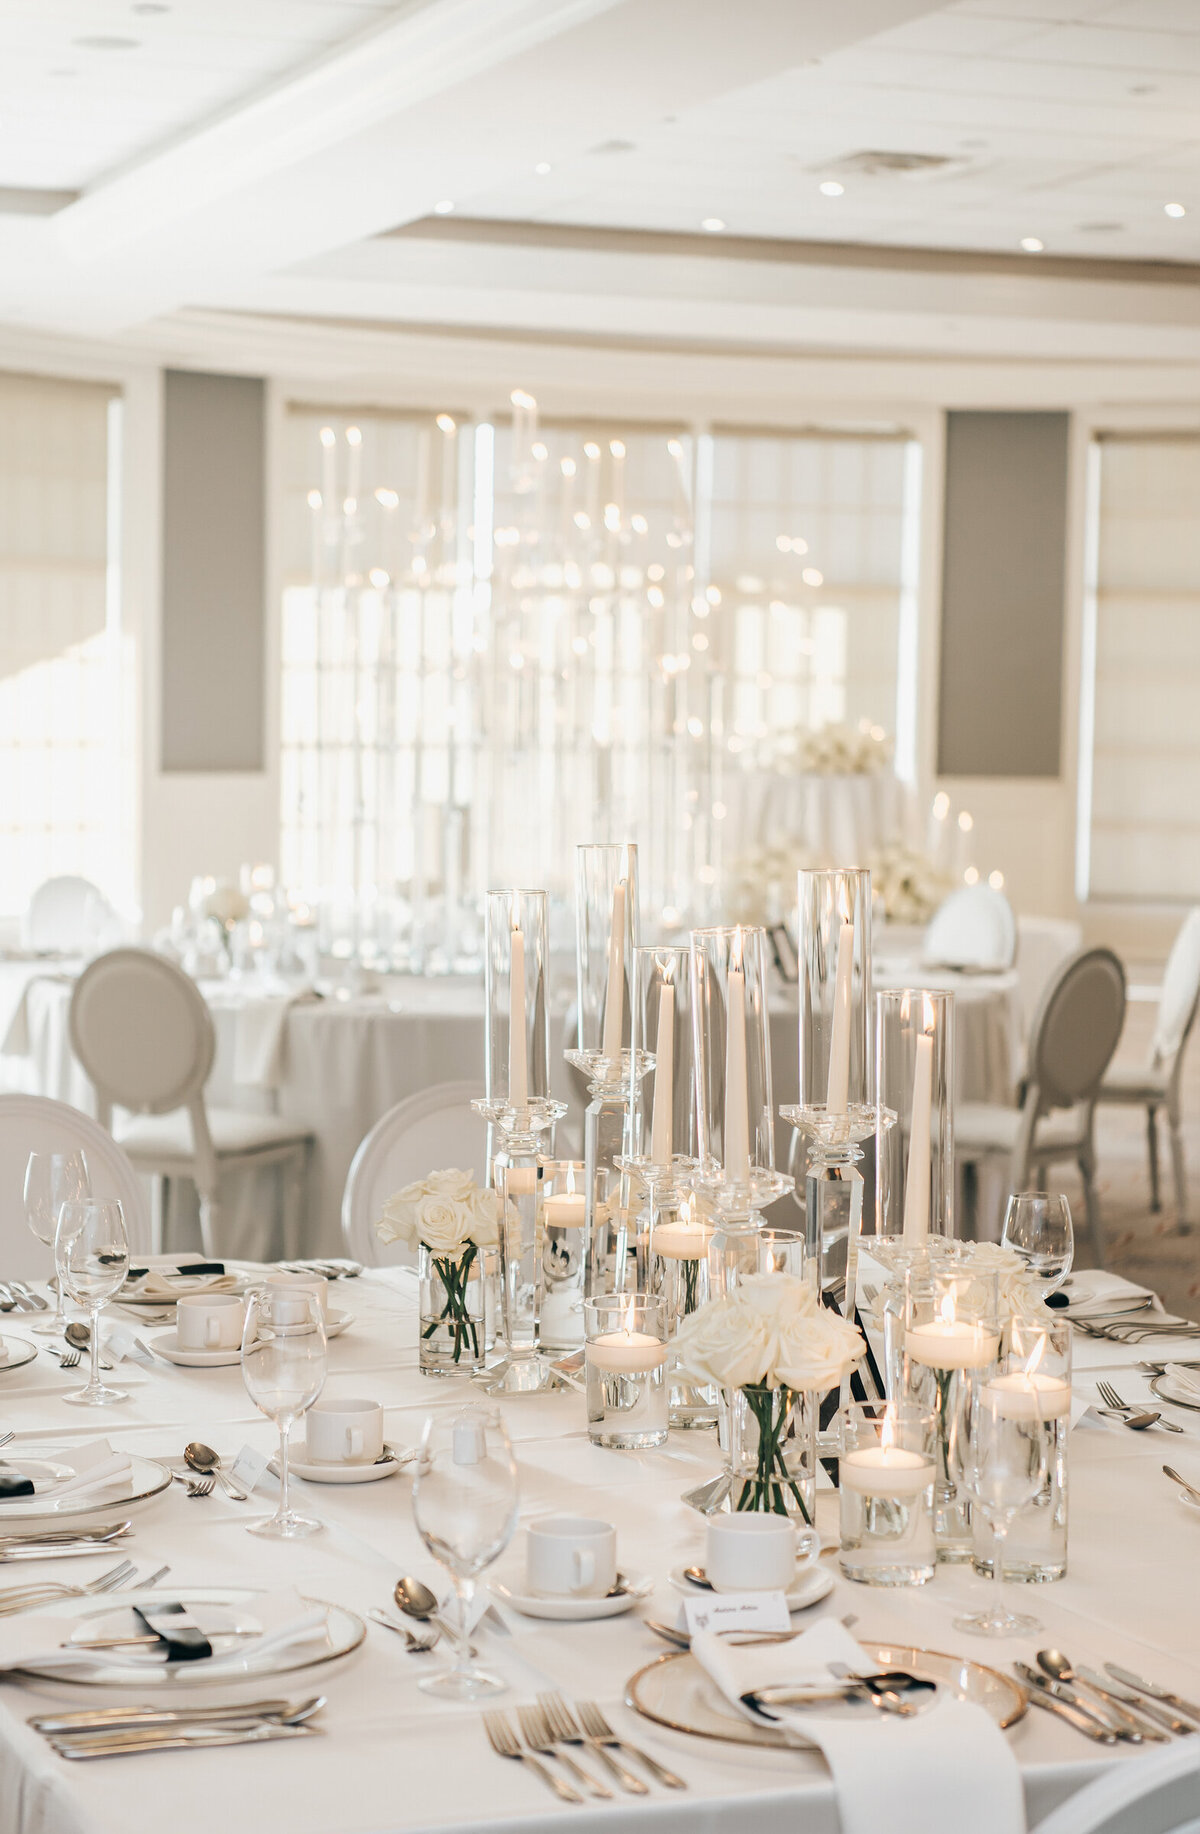 Elegant table settings with white accents and candles at a black tie wedding reception